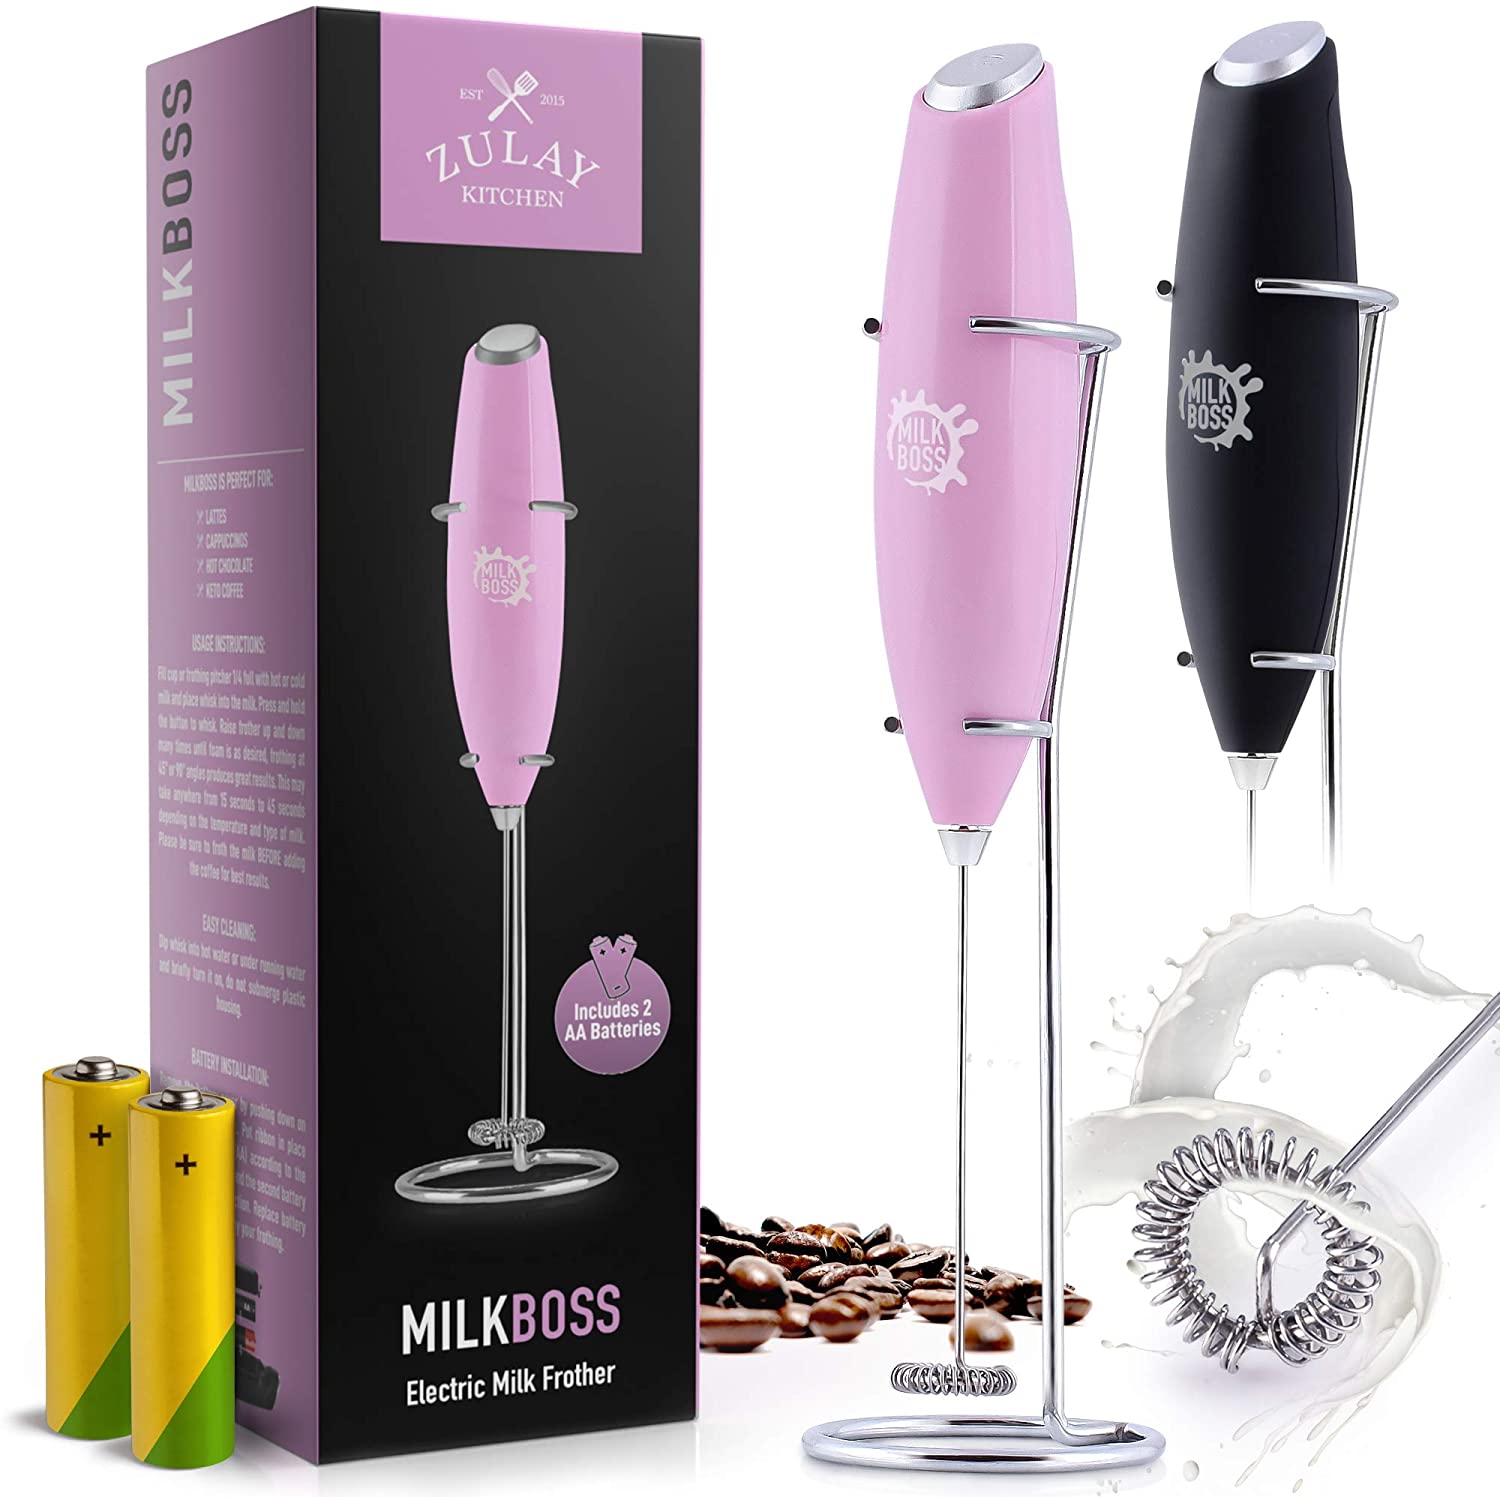 Zulay Kitchen Milk Boss Electric Milk Frother Foam Maker (Batteries Included) - Rose Pink